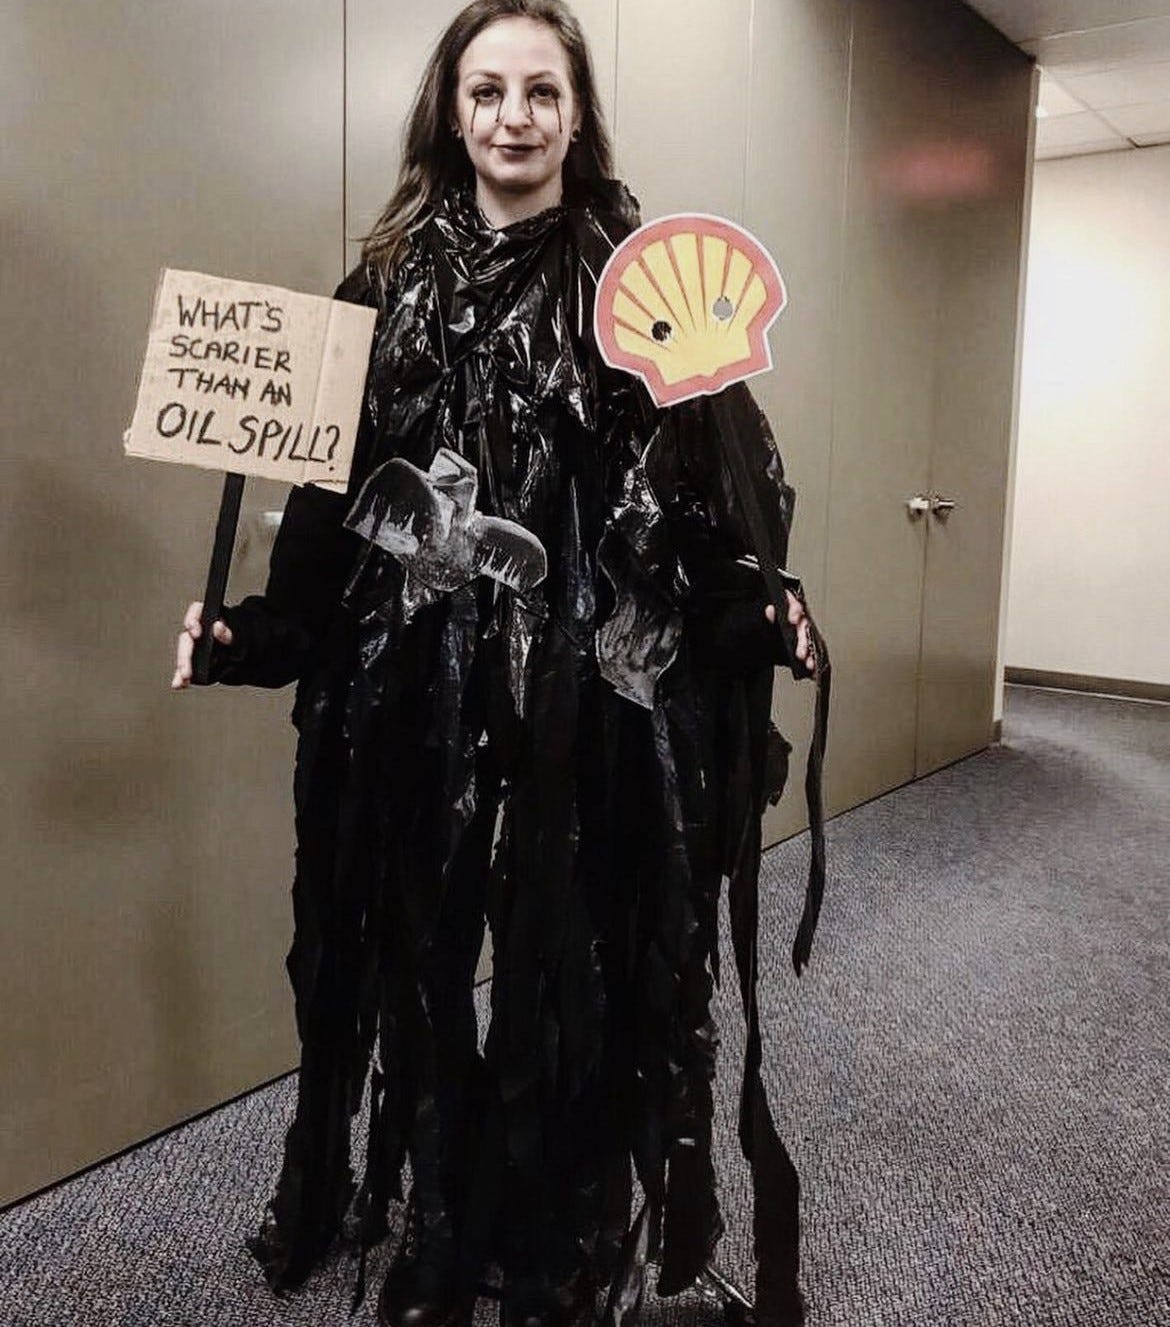 Chelsea, a white woman, wears shredded bin bags to emulate an oil spill. Her blonde hair is sprayed black and she has black eye liner running from her eyes down her face. In her right hand she holds a sign reading 'what's scarier than an oil spill'. In the other hand she holds a face mask on a stick which is a shell logo with eye holes. On the black bags are black and white print outs of animals covered in oil.